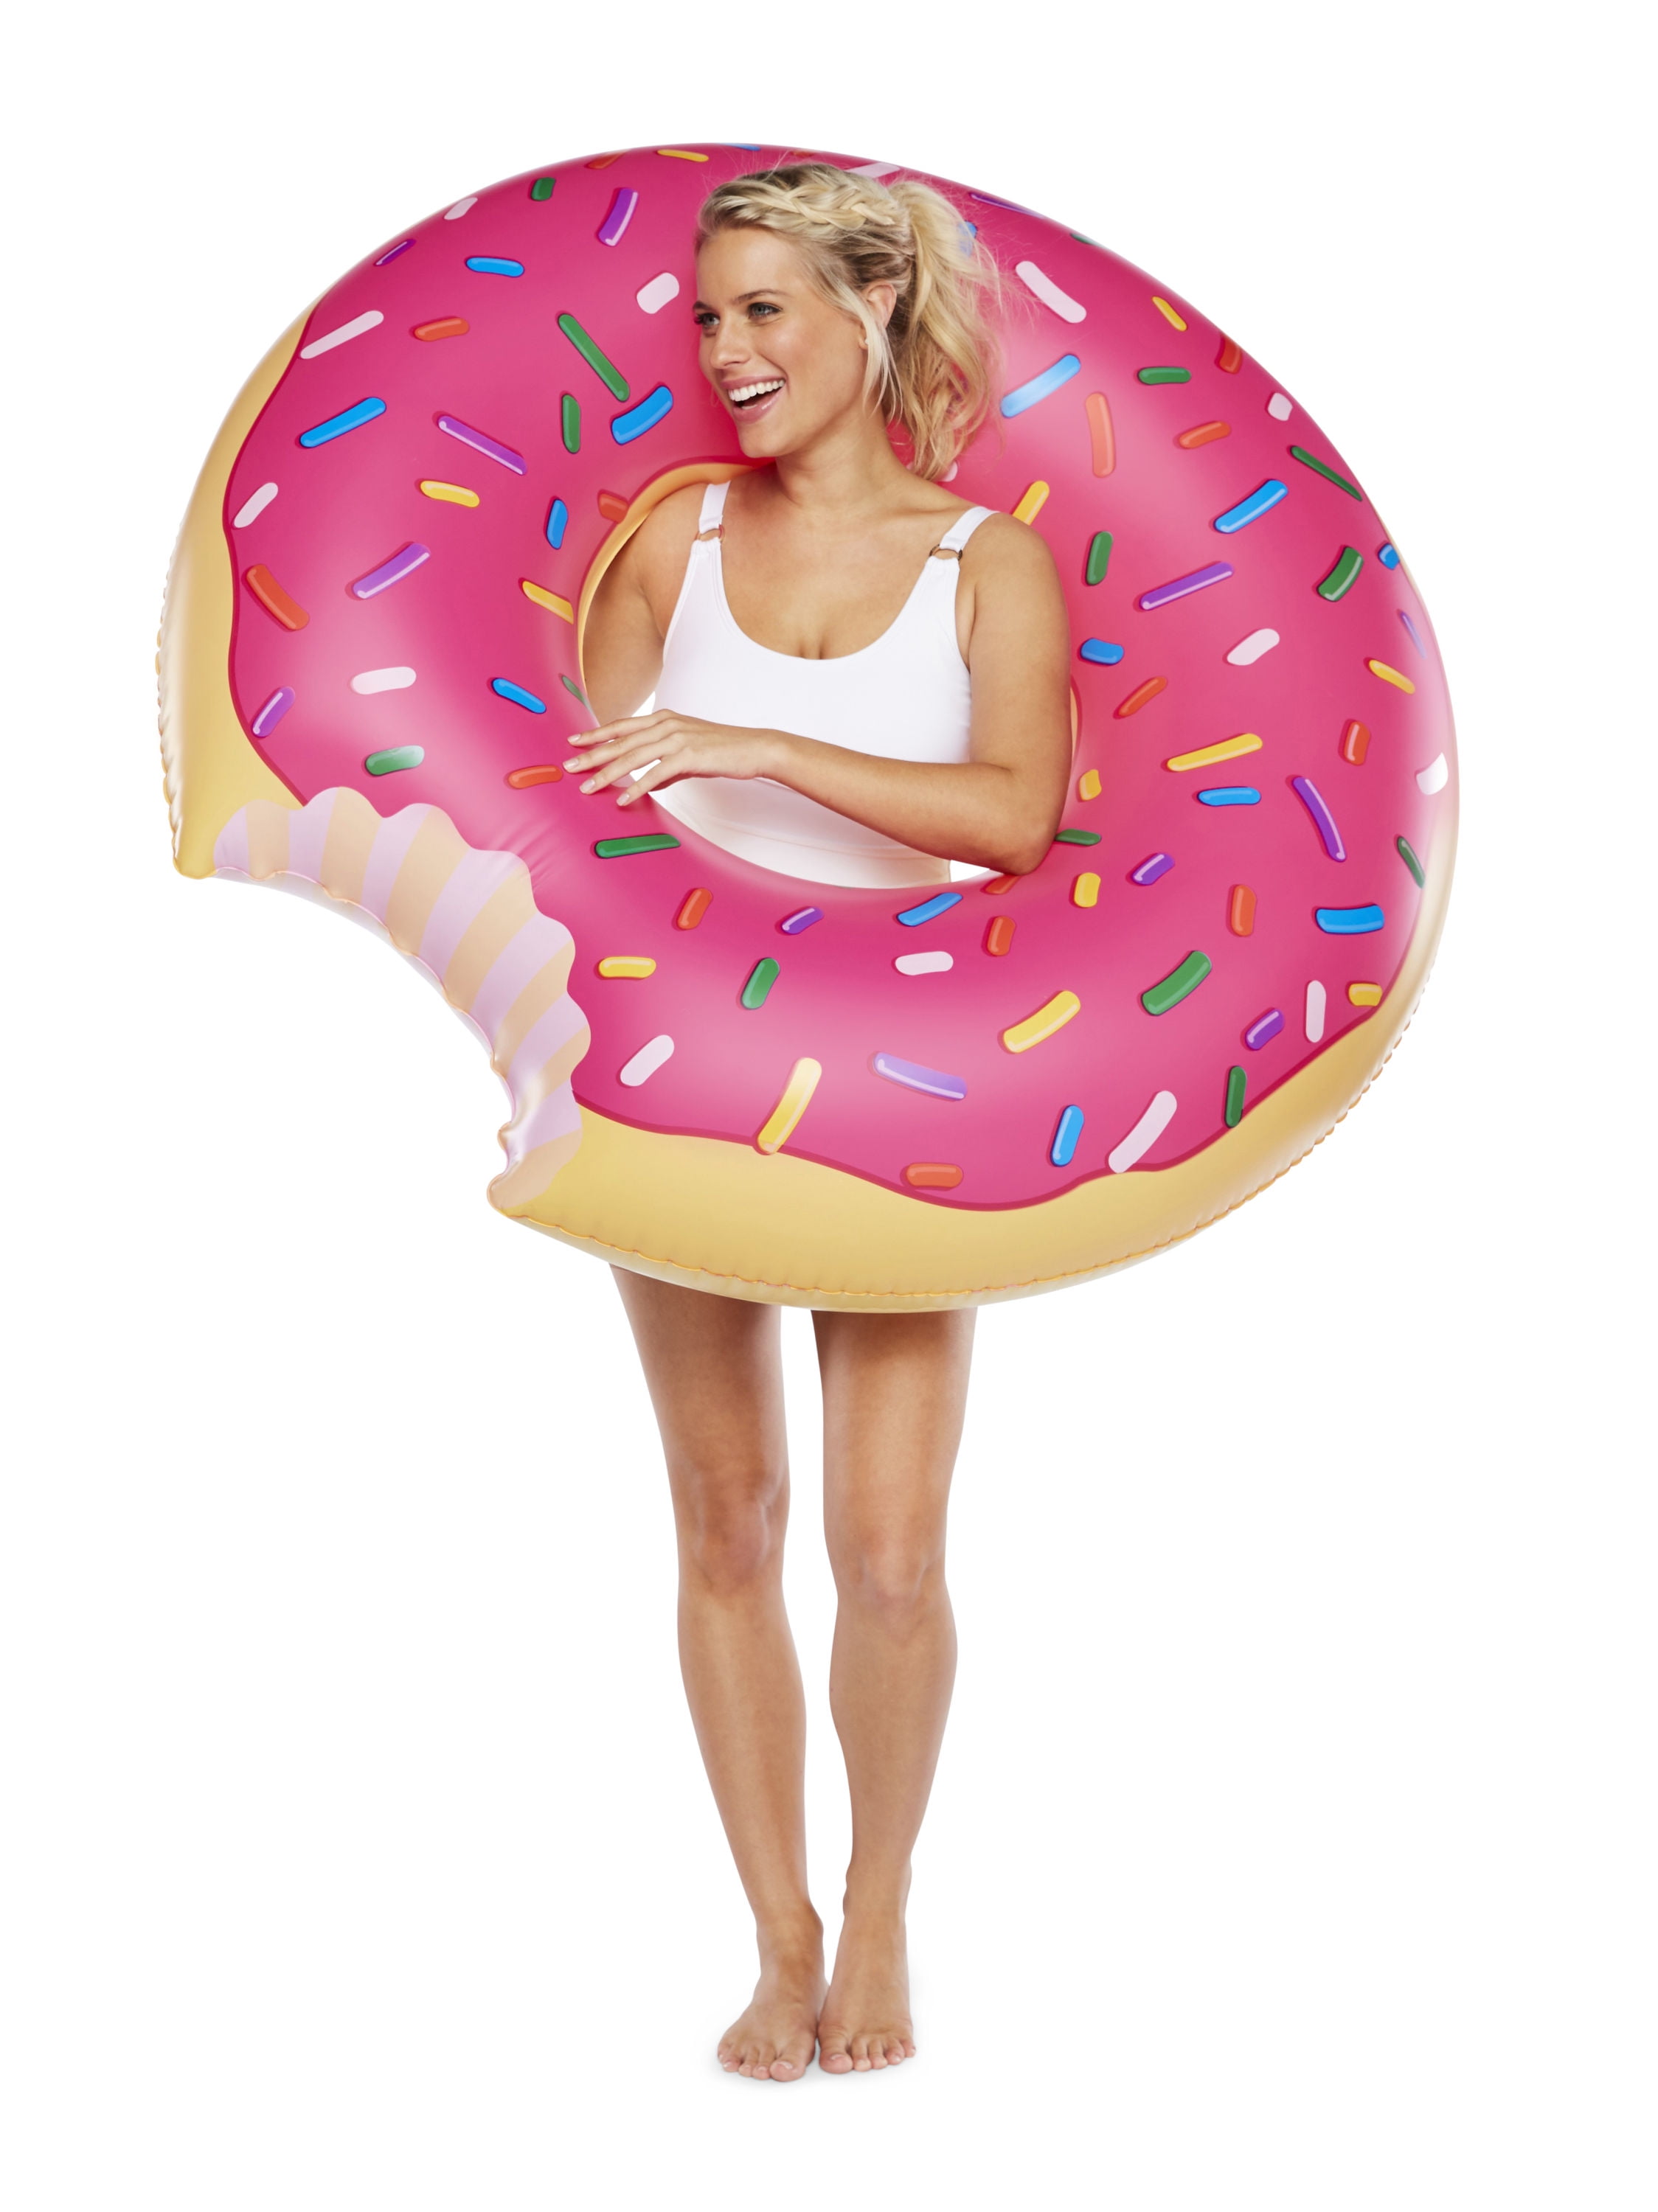 BigMouthToys Gigantic 4-Foot Donut Pool Float Strawberry Frosted with Sprinkles BM1516 for sale online 